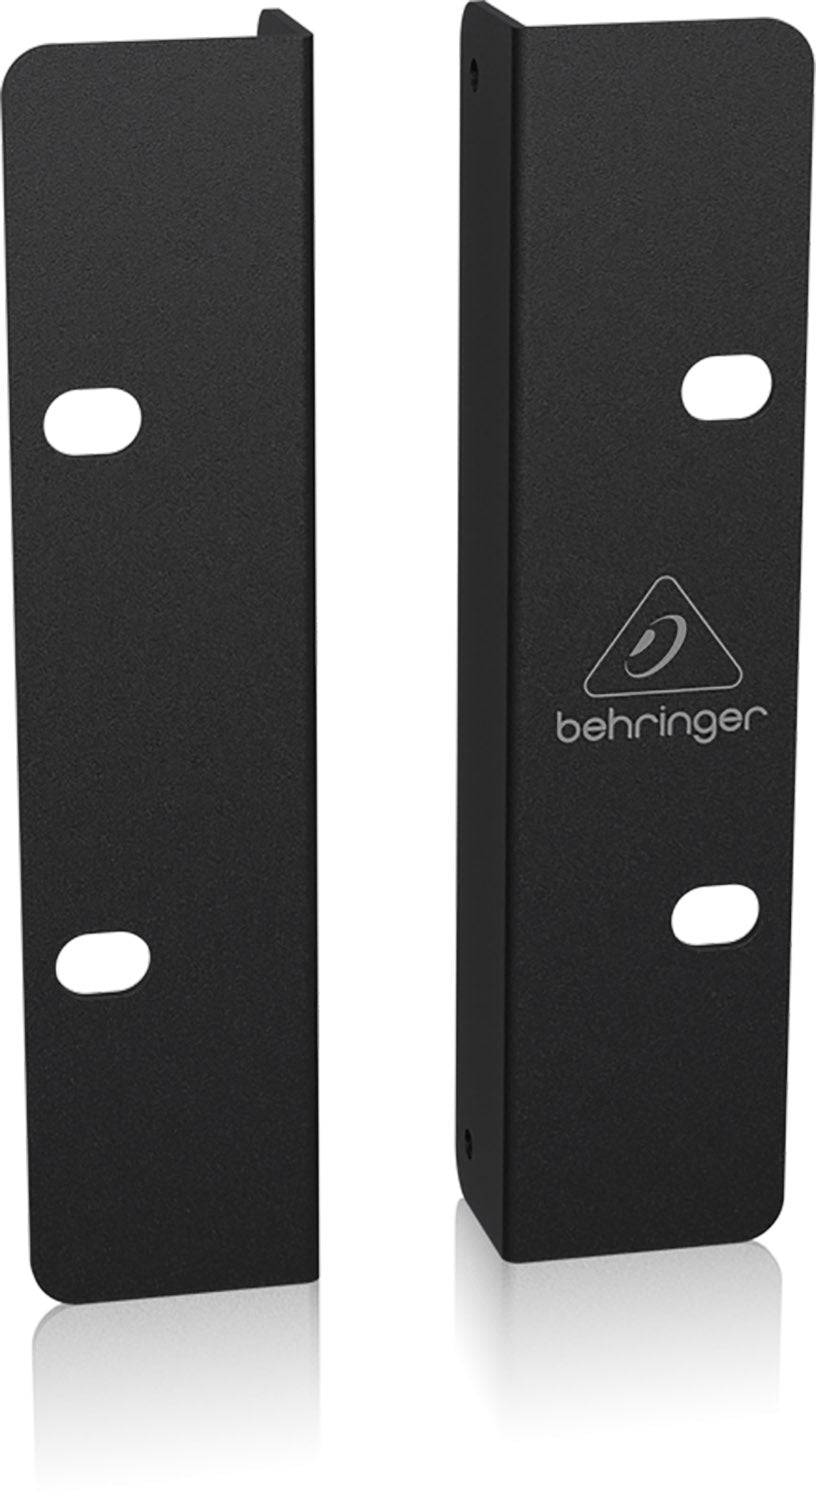 Behringer EURORACK EARS (80 HP), 19 Inches Rack Ears For 80 HP Eurorack Chassis - Hollywood DJ